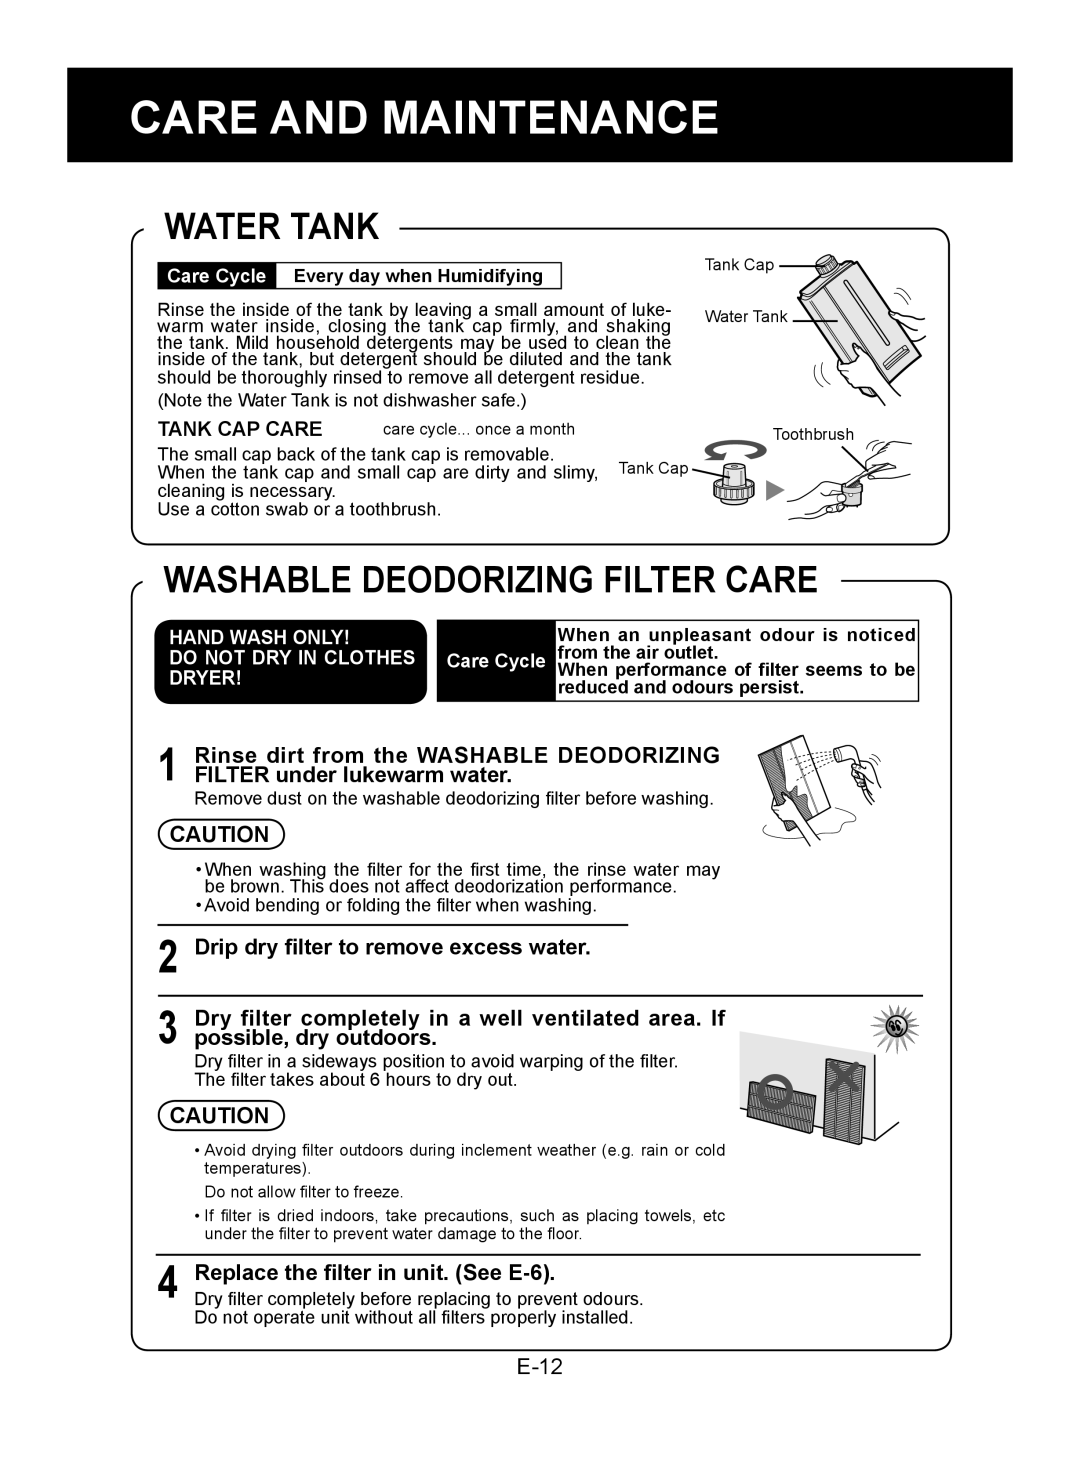 Sharp KC-850E Water Tank, Washable Deodorizing Filter Care, Care And Maintenance, Rinse dirt from the WASHABLE DEODORIZING 